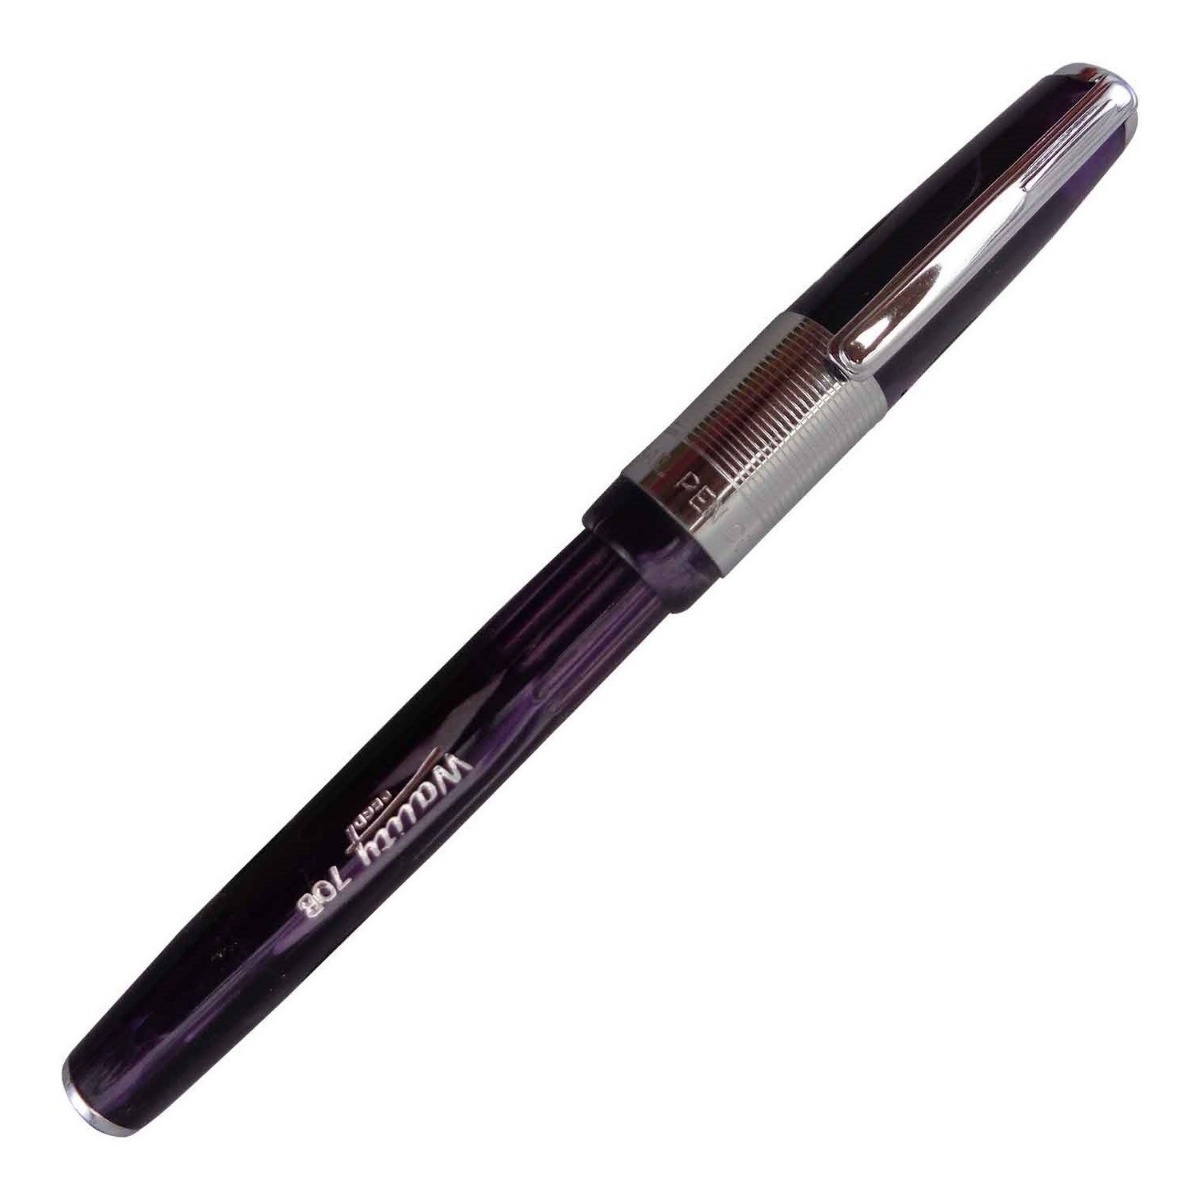 Airmail - Wality 70B Model:16025  Dark Purple Color Marble Finish Design Body With Silver Clip Cap Type Fine Tip Fountain Pen